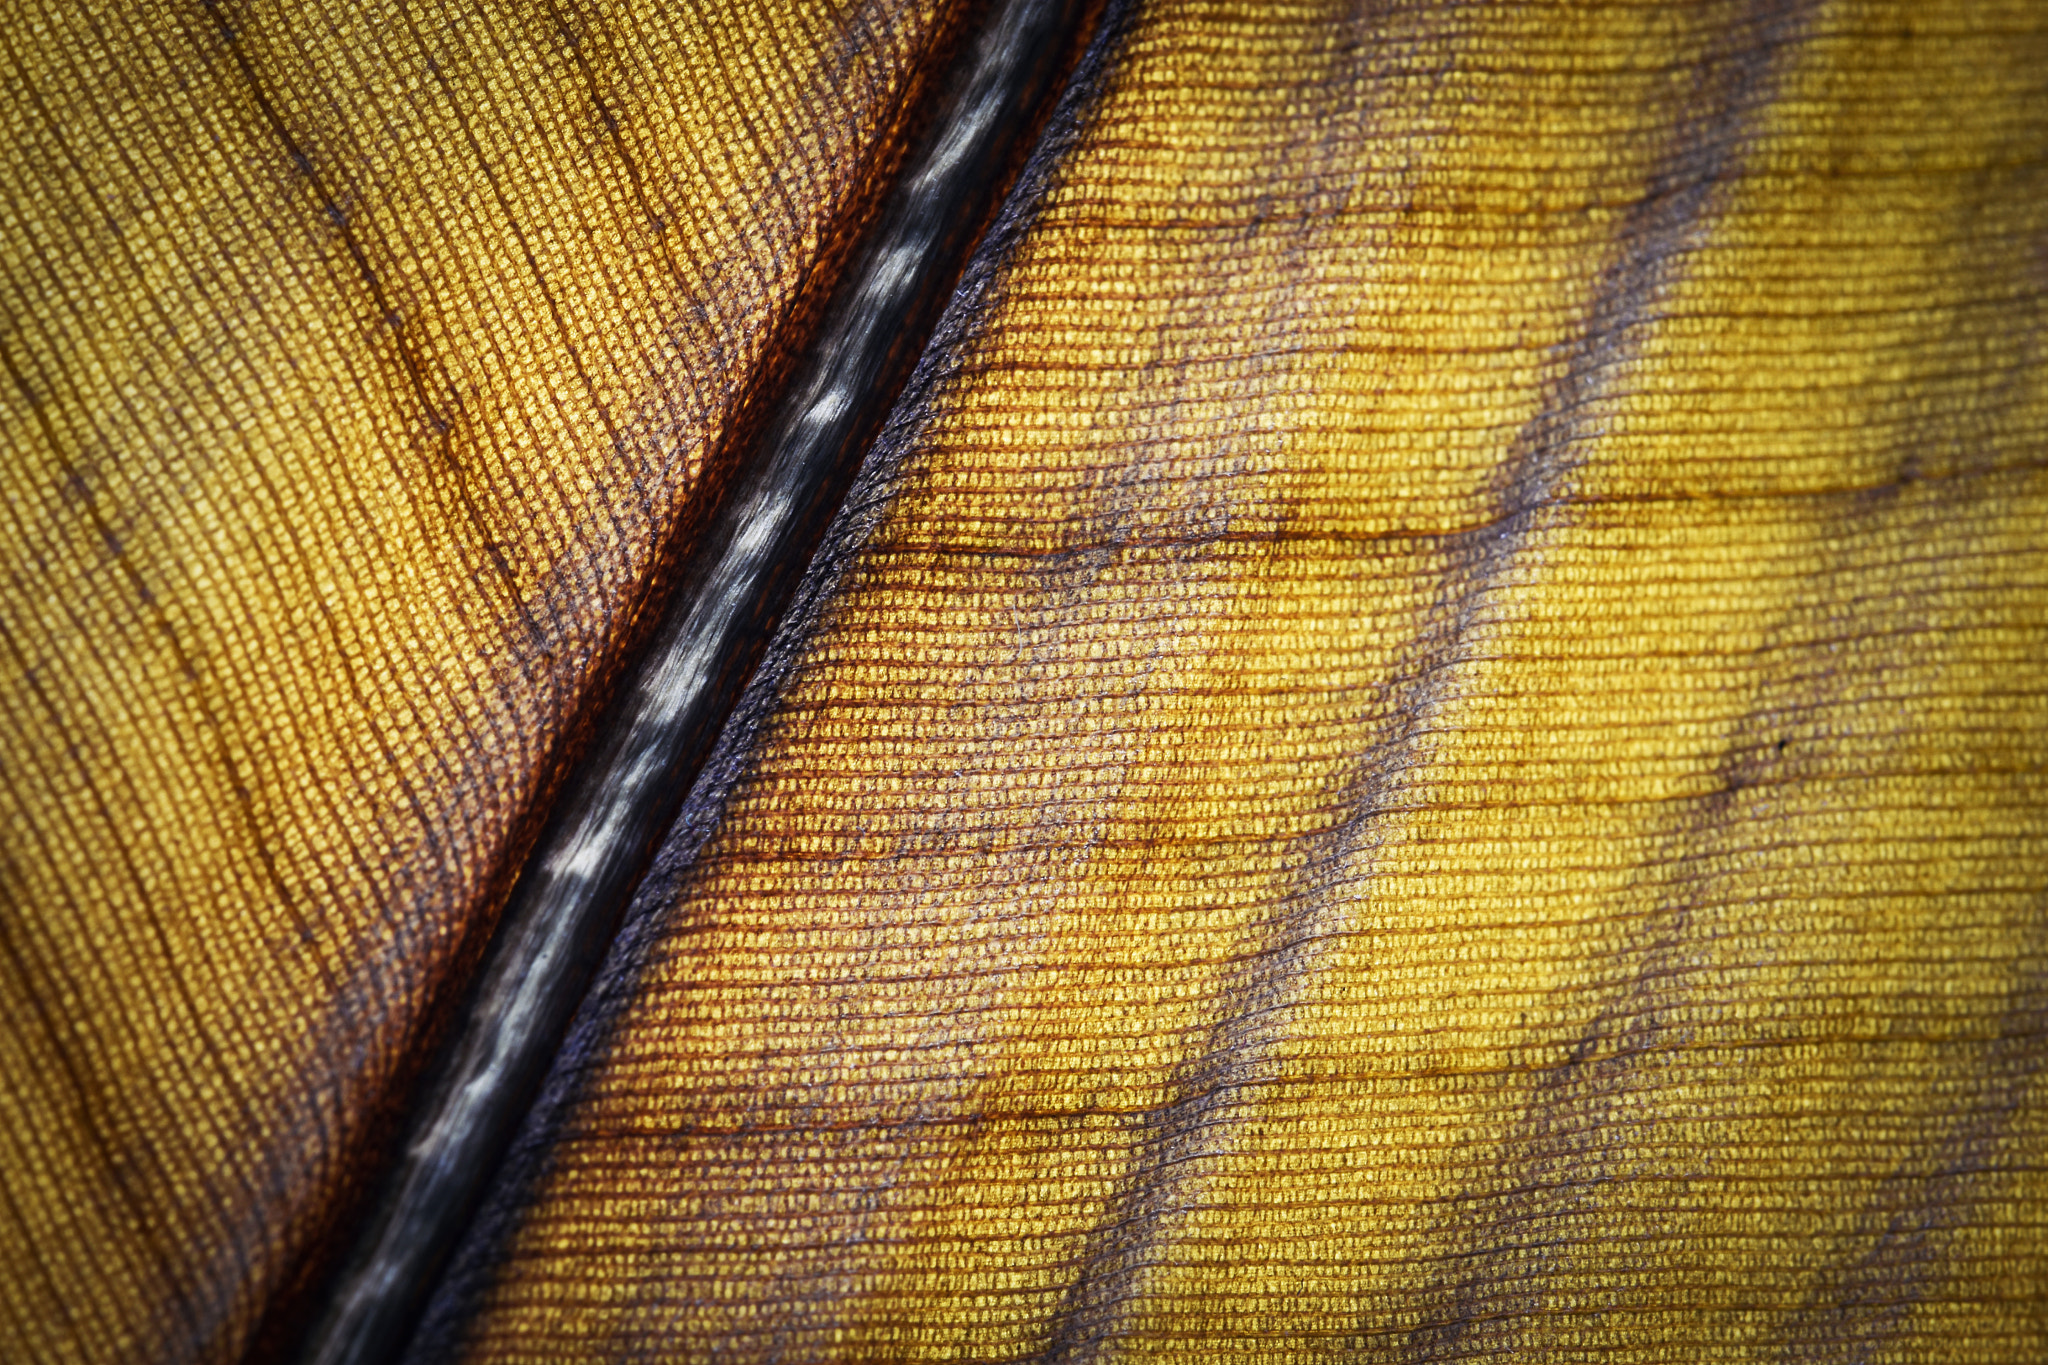 Nikon D5500 + Tamron SP 90mm F2.8 Di VC USD 1:1 Macro (F004) sample photo. Detail of an old dry banana leaf photography